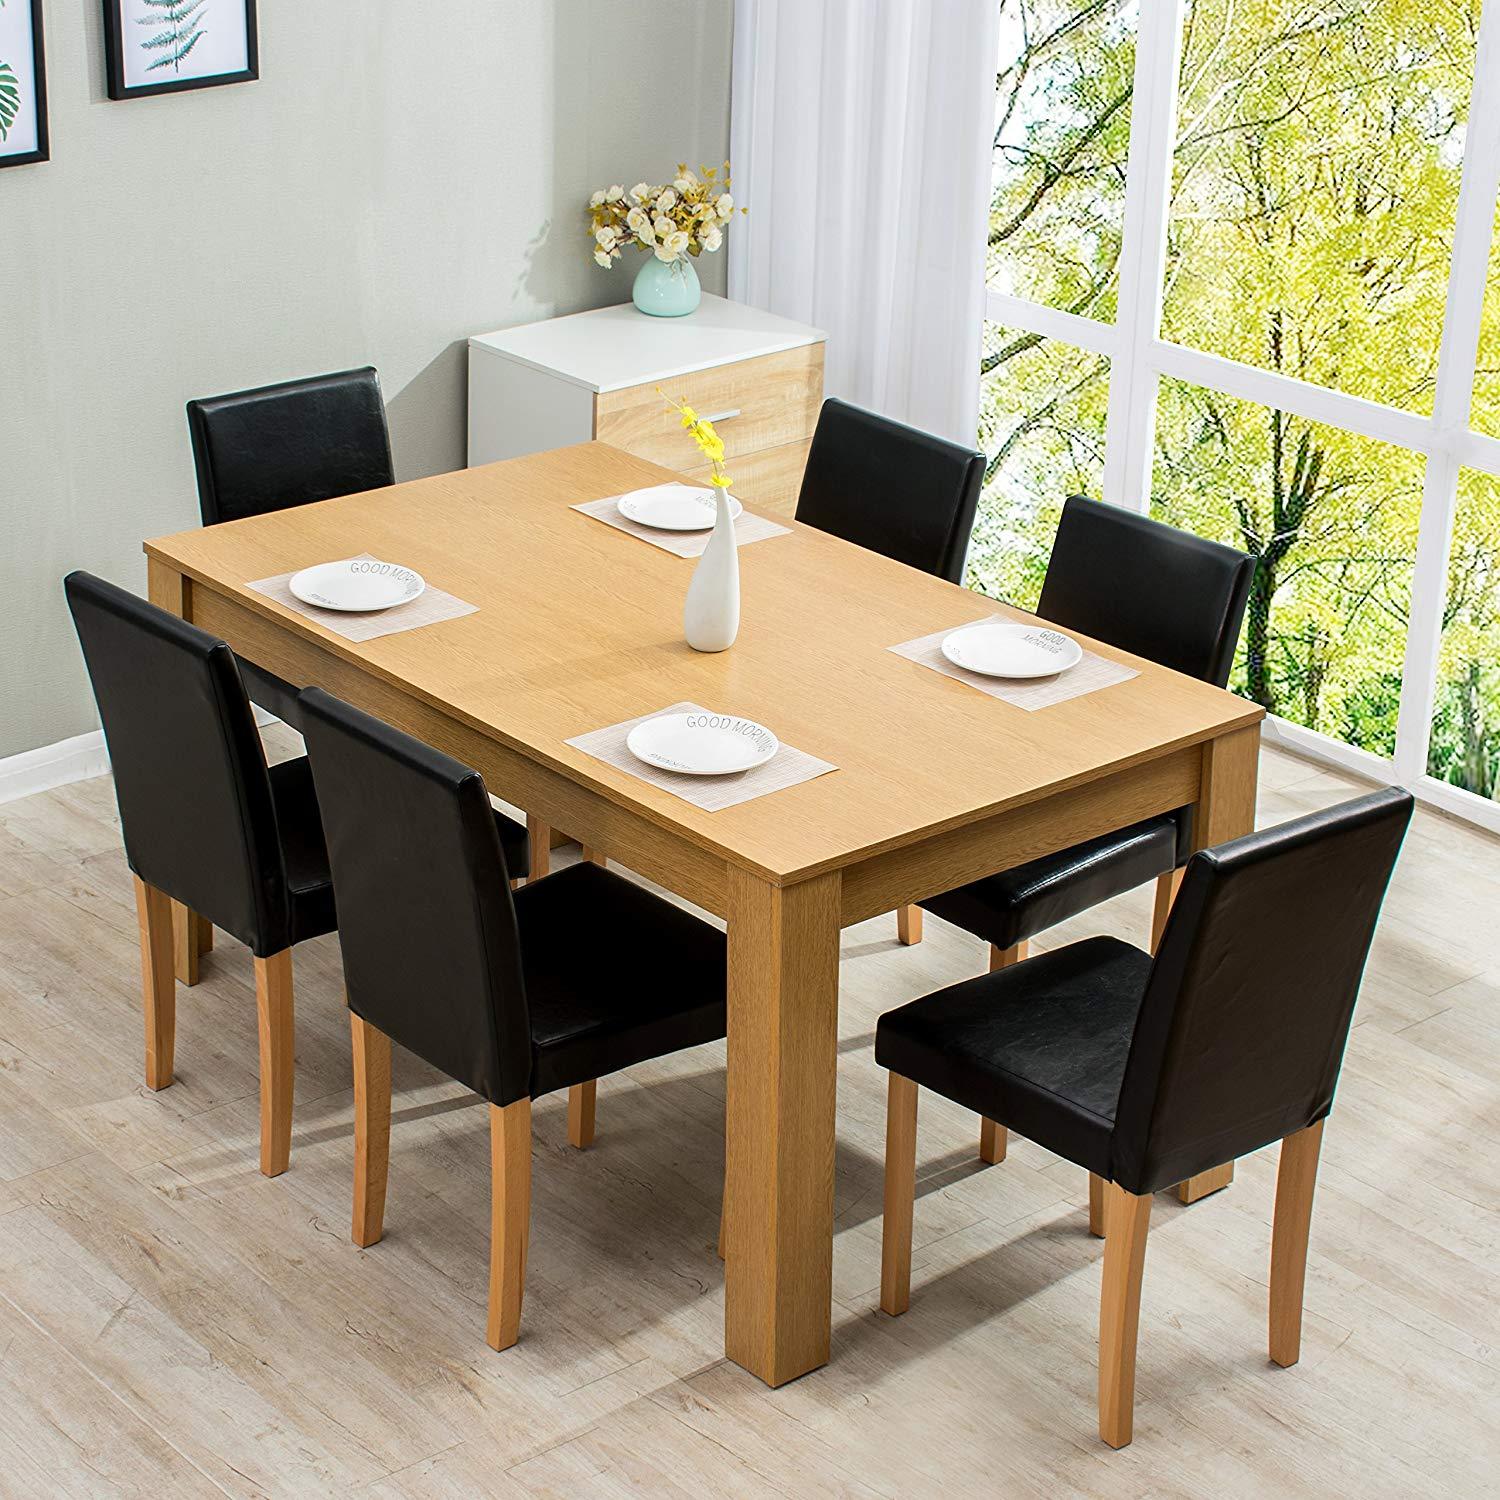 7-Piece Dining Room Set 6-Seater Dining Table with 6 Chairs – DaAl's